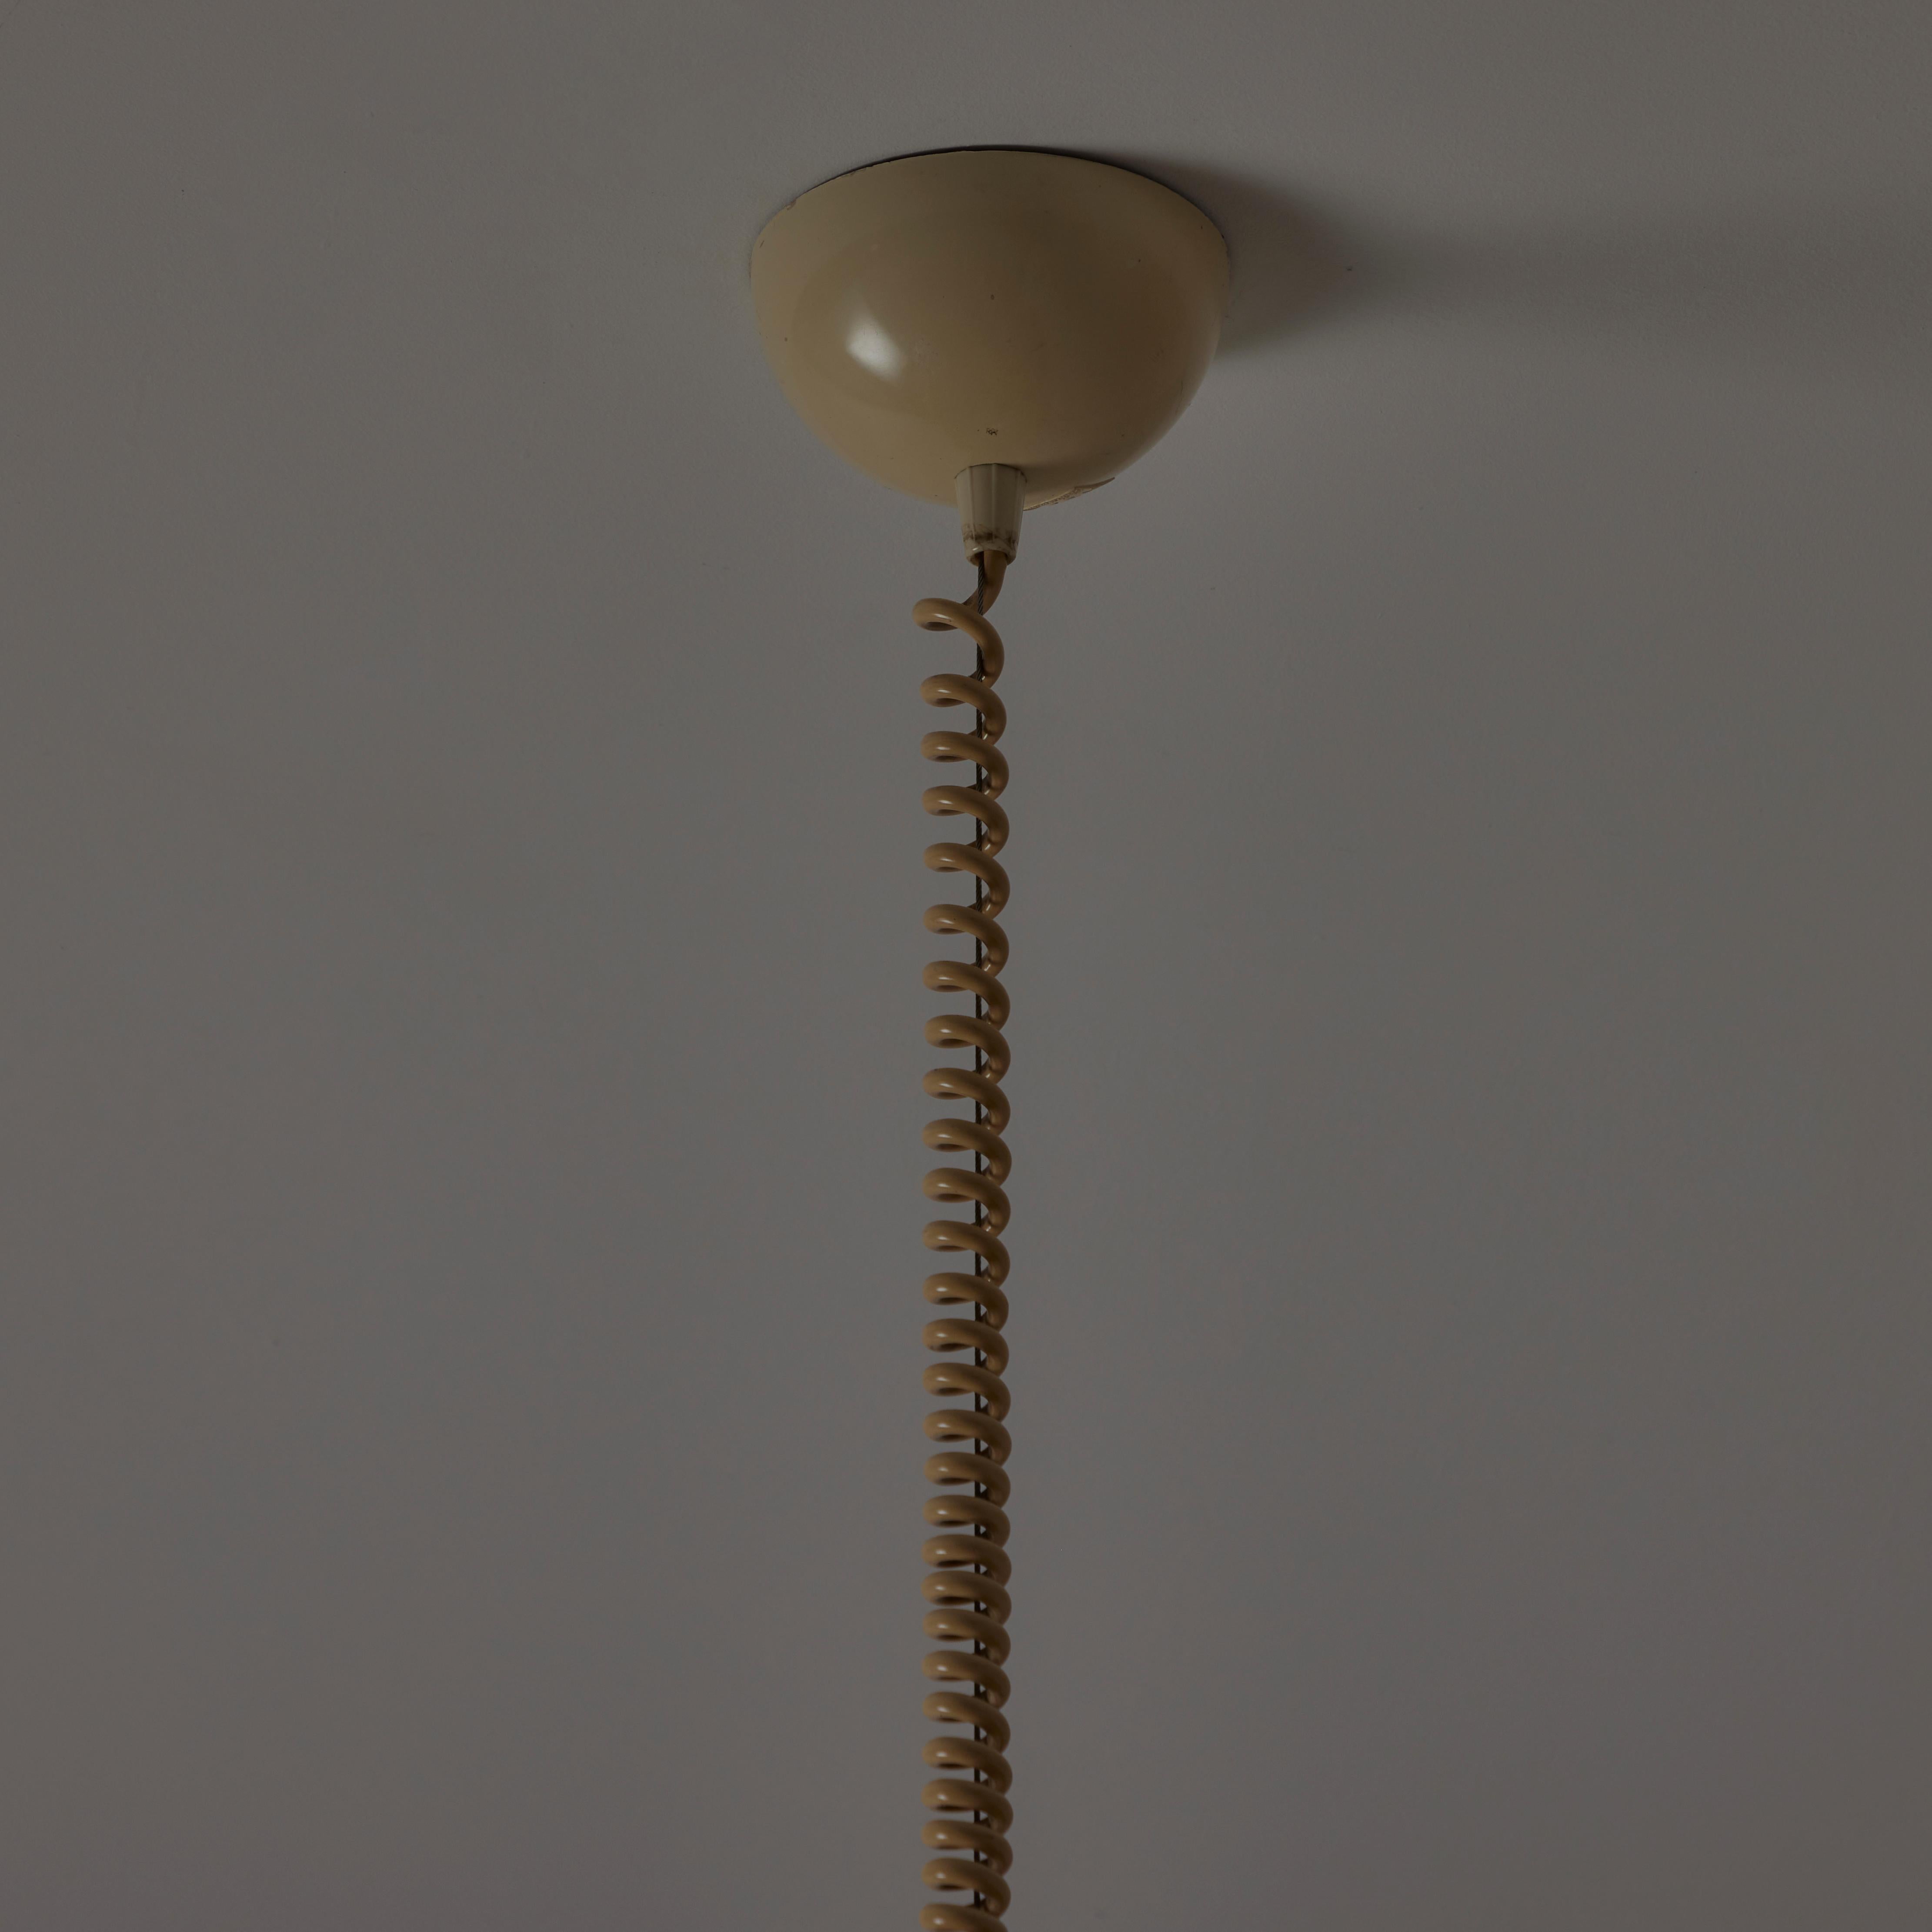 Rare 'Nuvola' Suspension Light by Tobia Scarpa for Flos 1